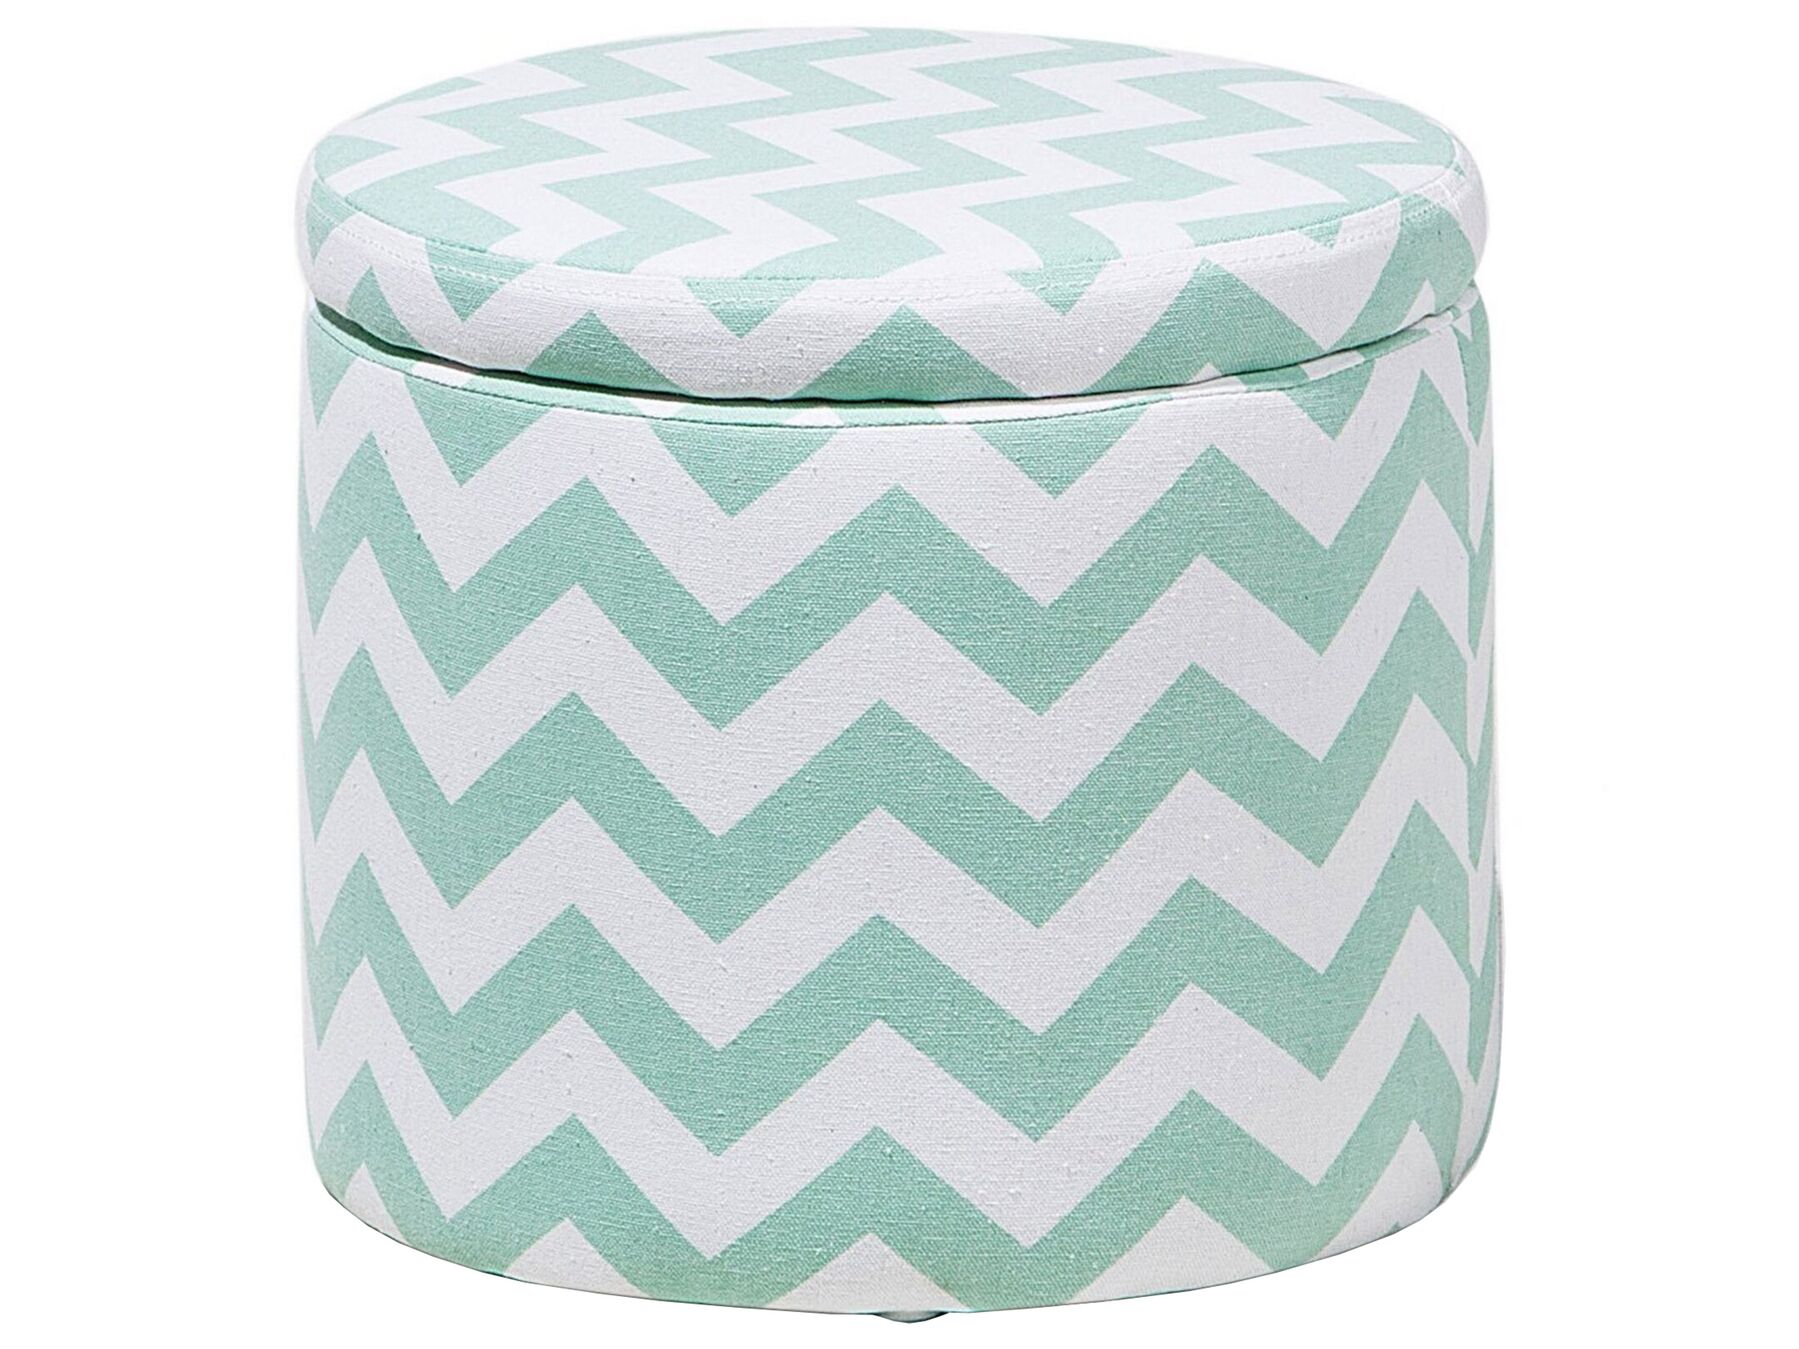 Storage Footstool Mint Green and White TUNICA_657526